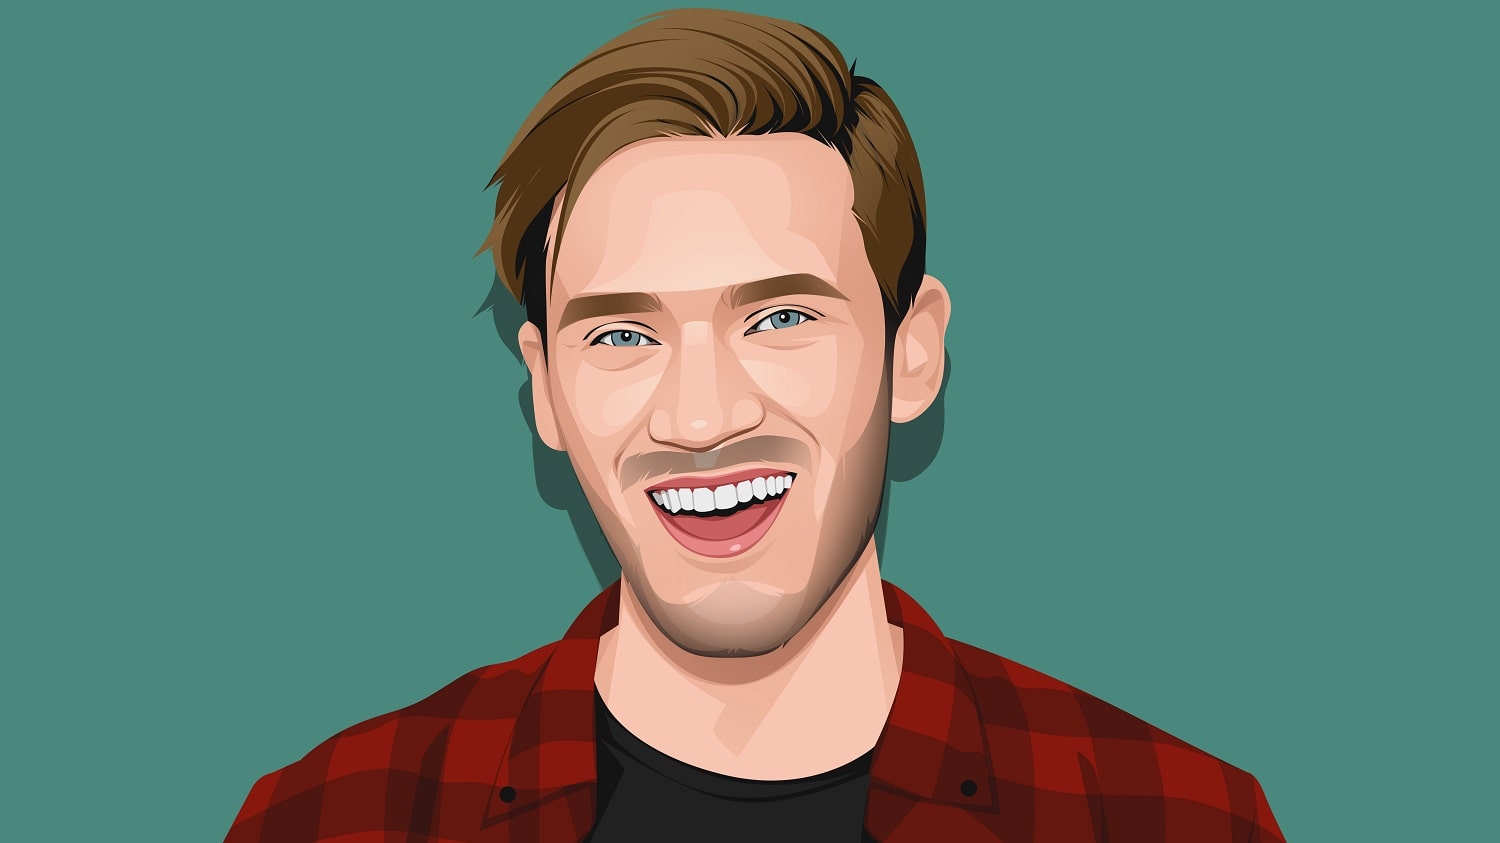 PewDiePie Copyright by Inspirationfeed.